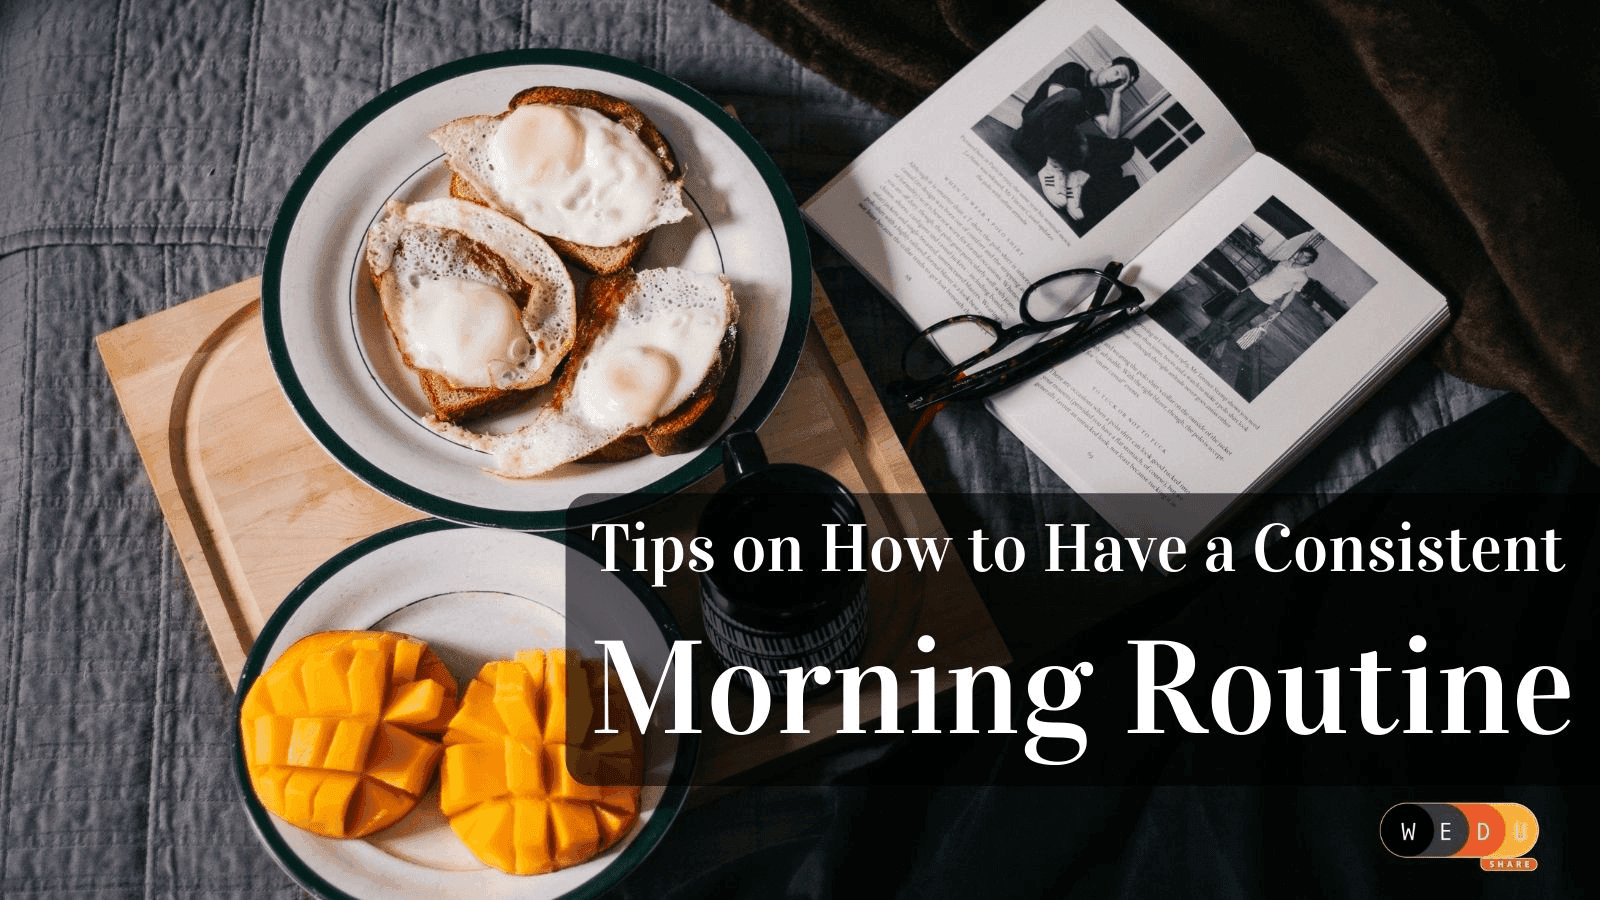 Tips on How to Have a Consistent Morning Routine